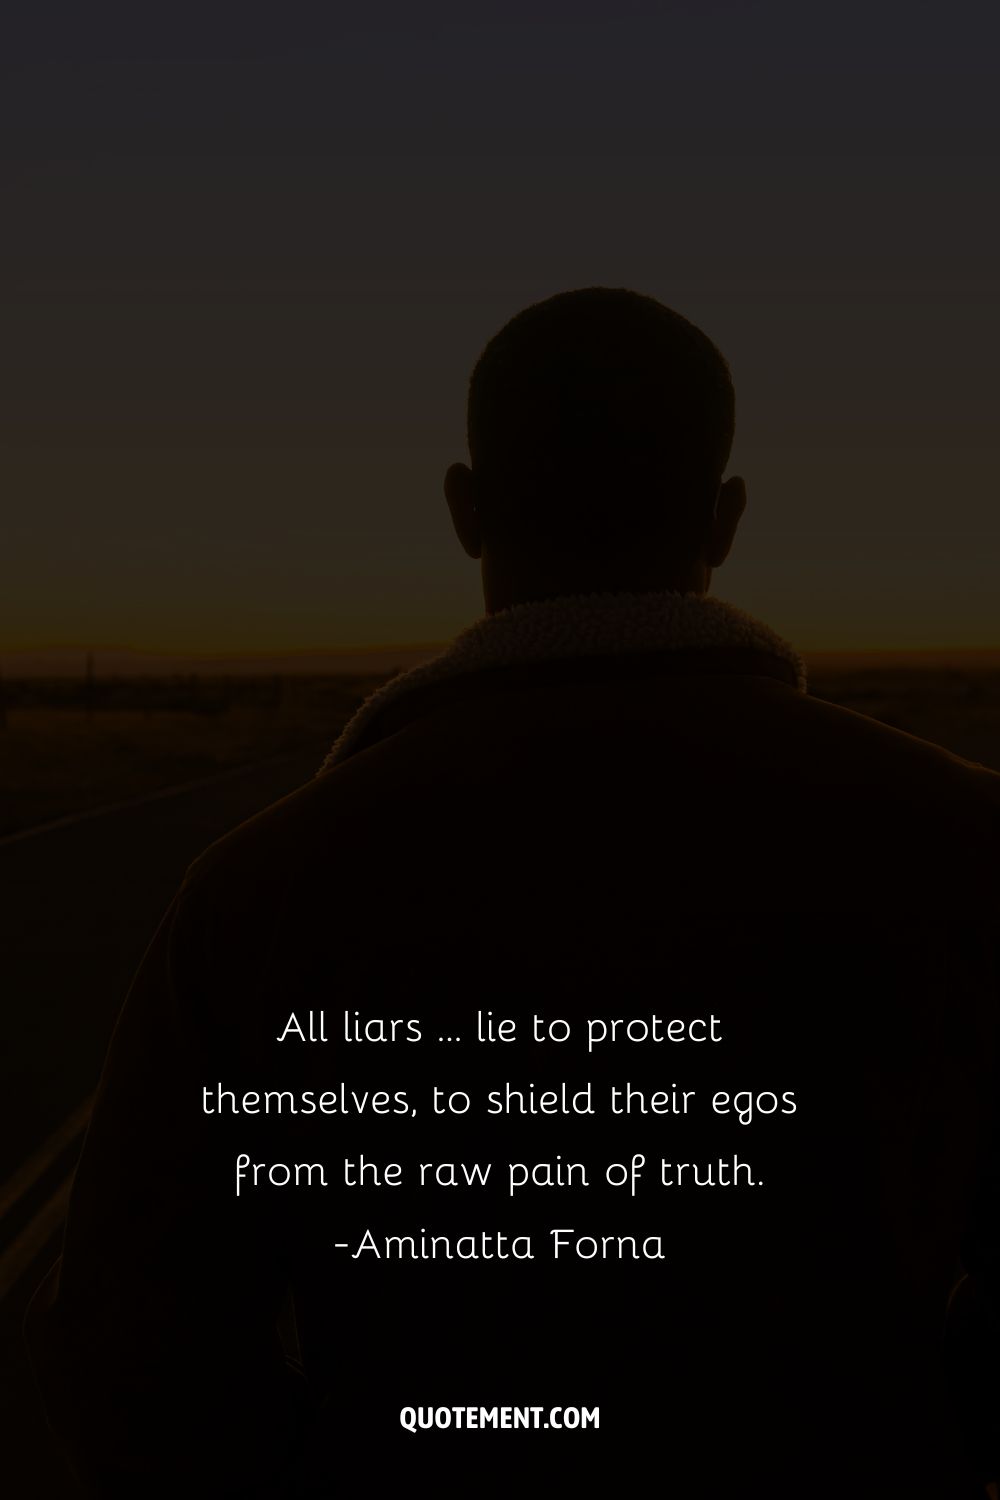 All liars … lie to protect themselves, to shield their egos from the raw pain of truth